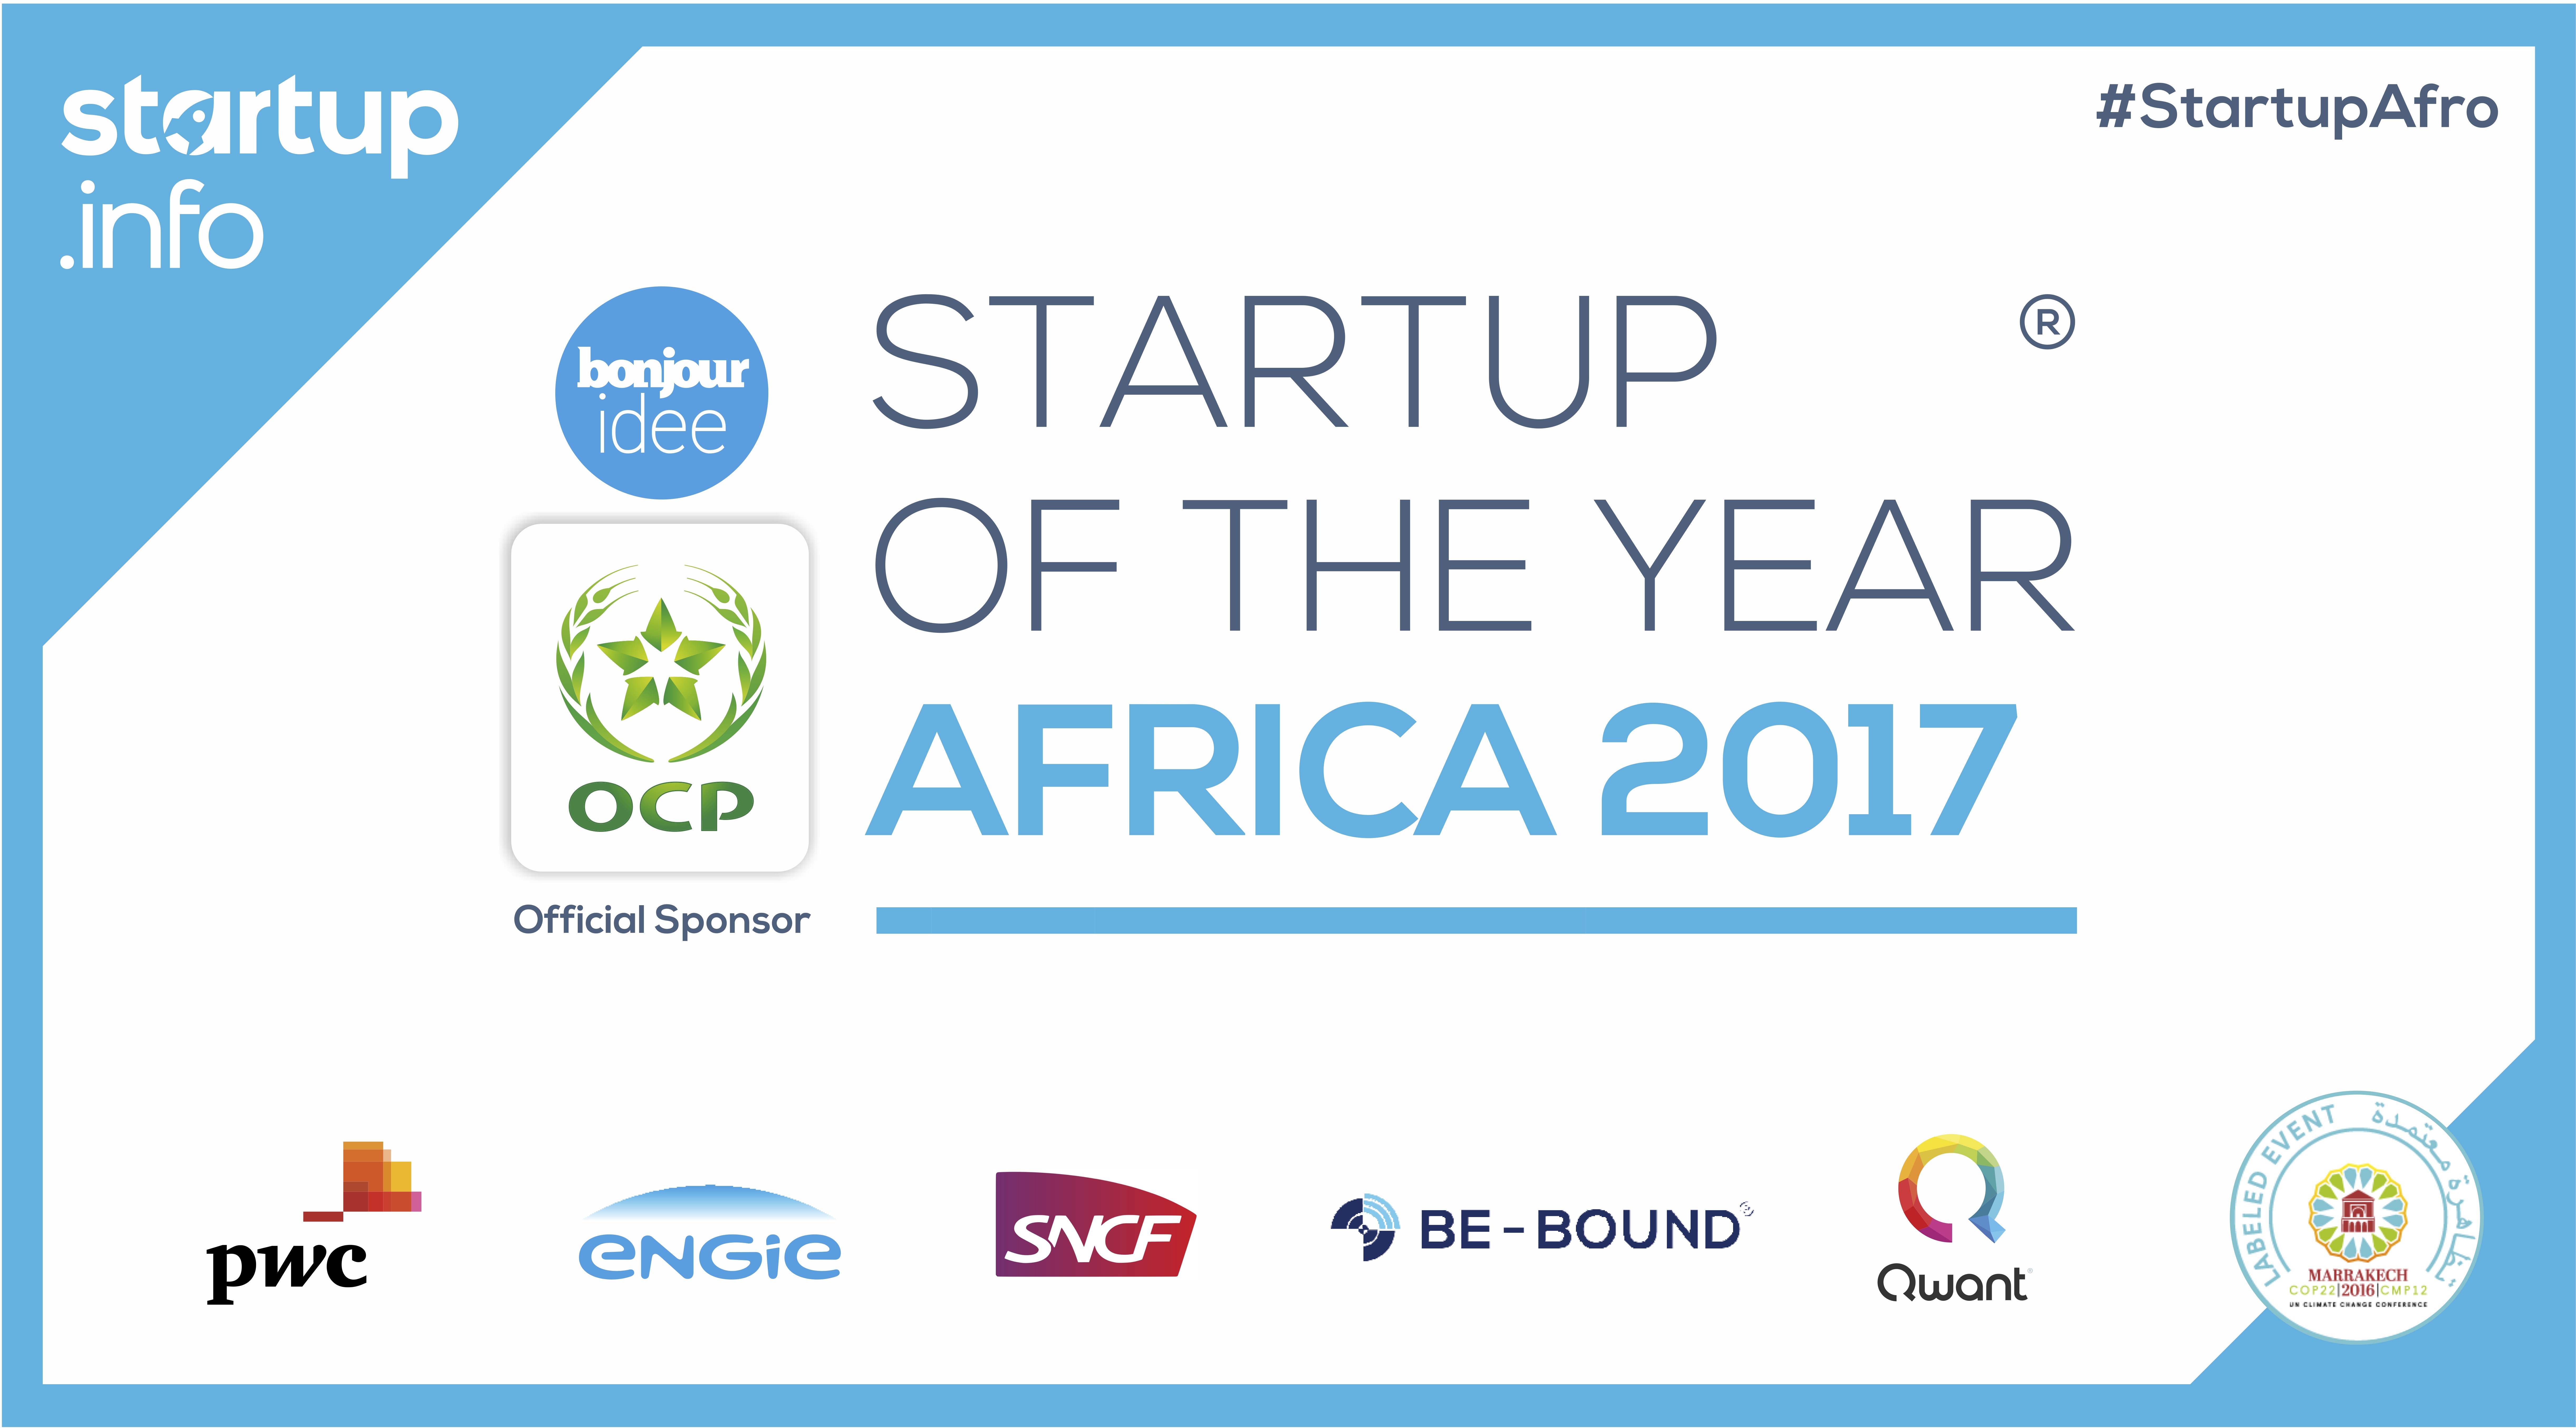 Bonjour Idée and OCP launch the “Startup of the Year Africa 2017” award